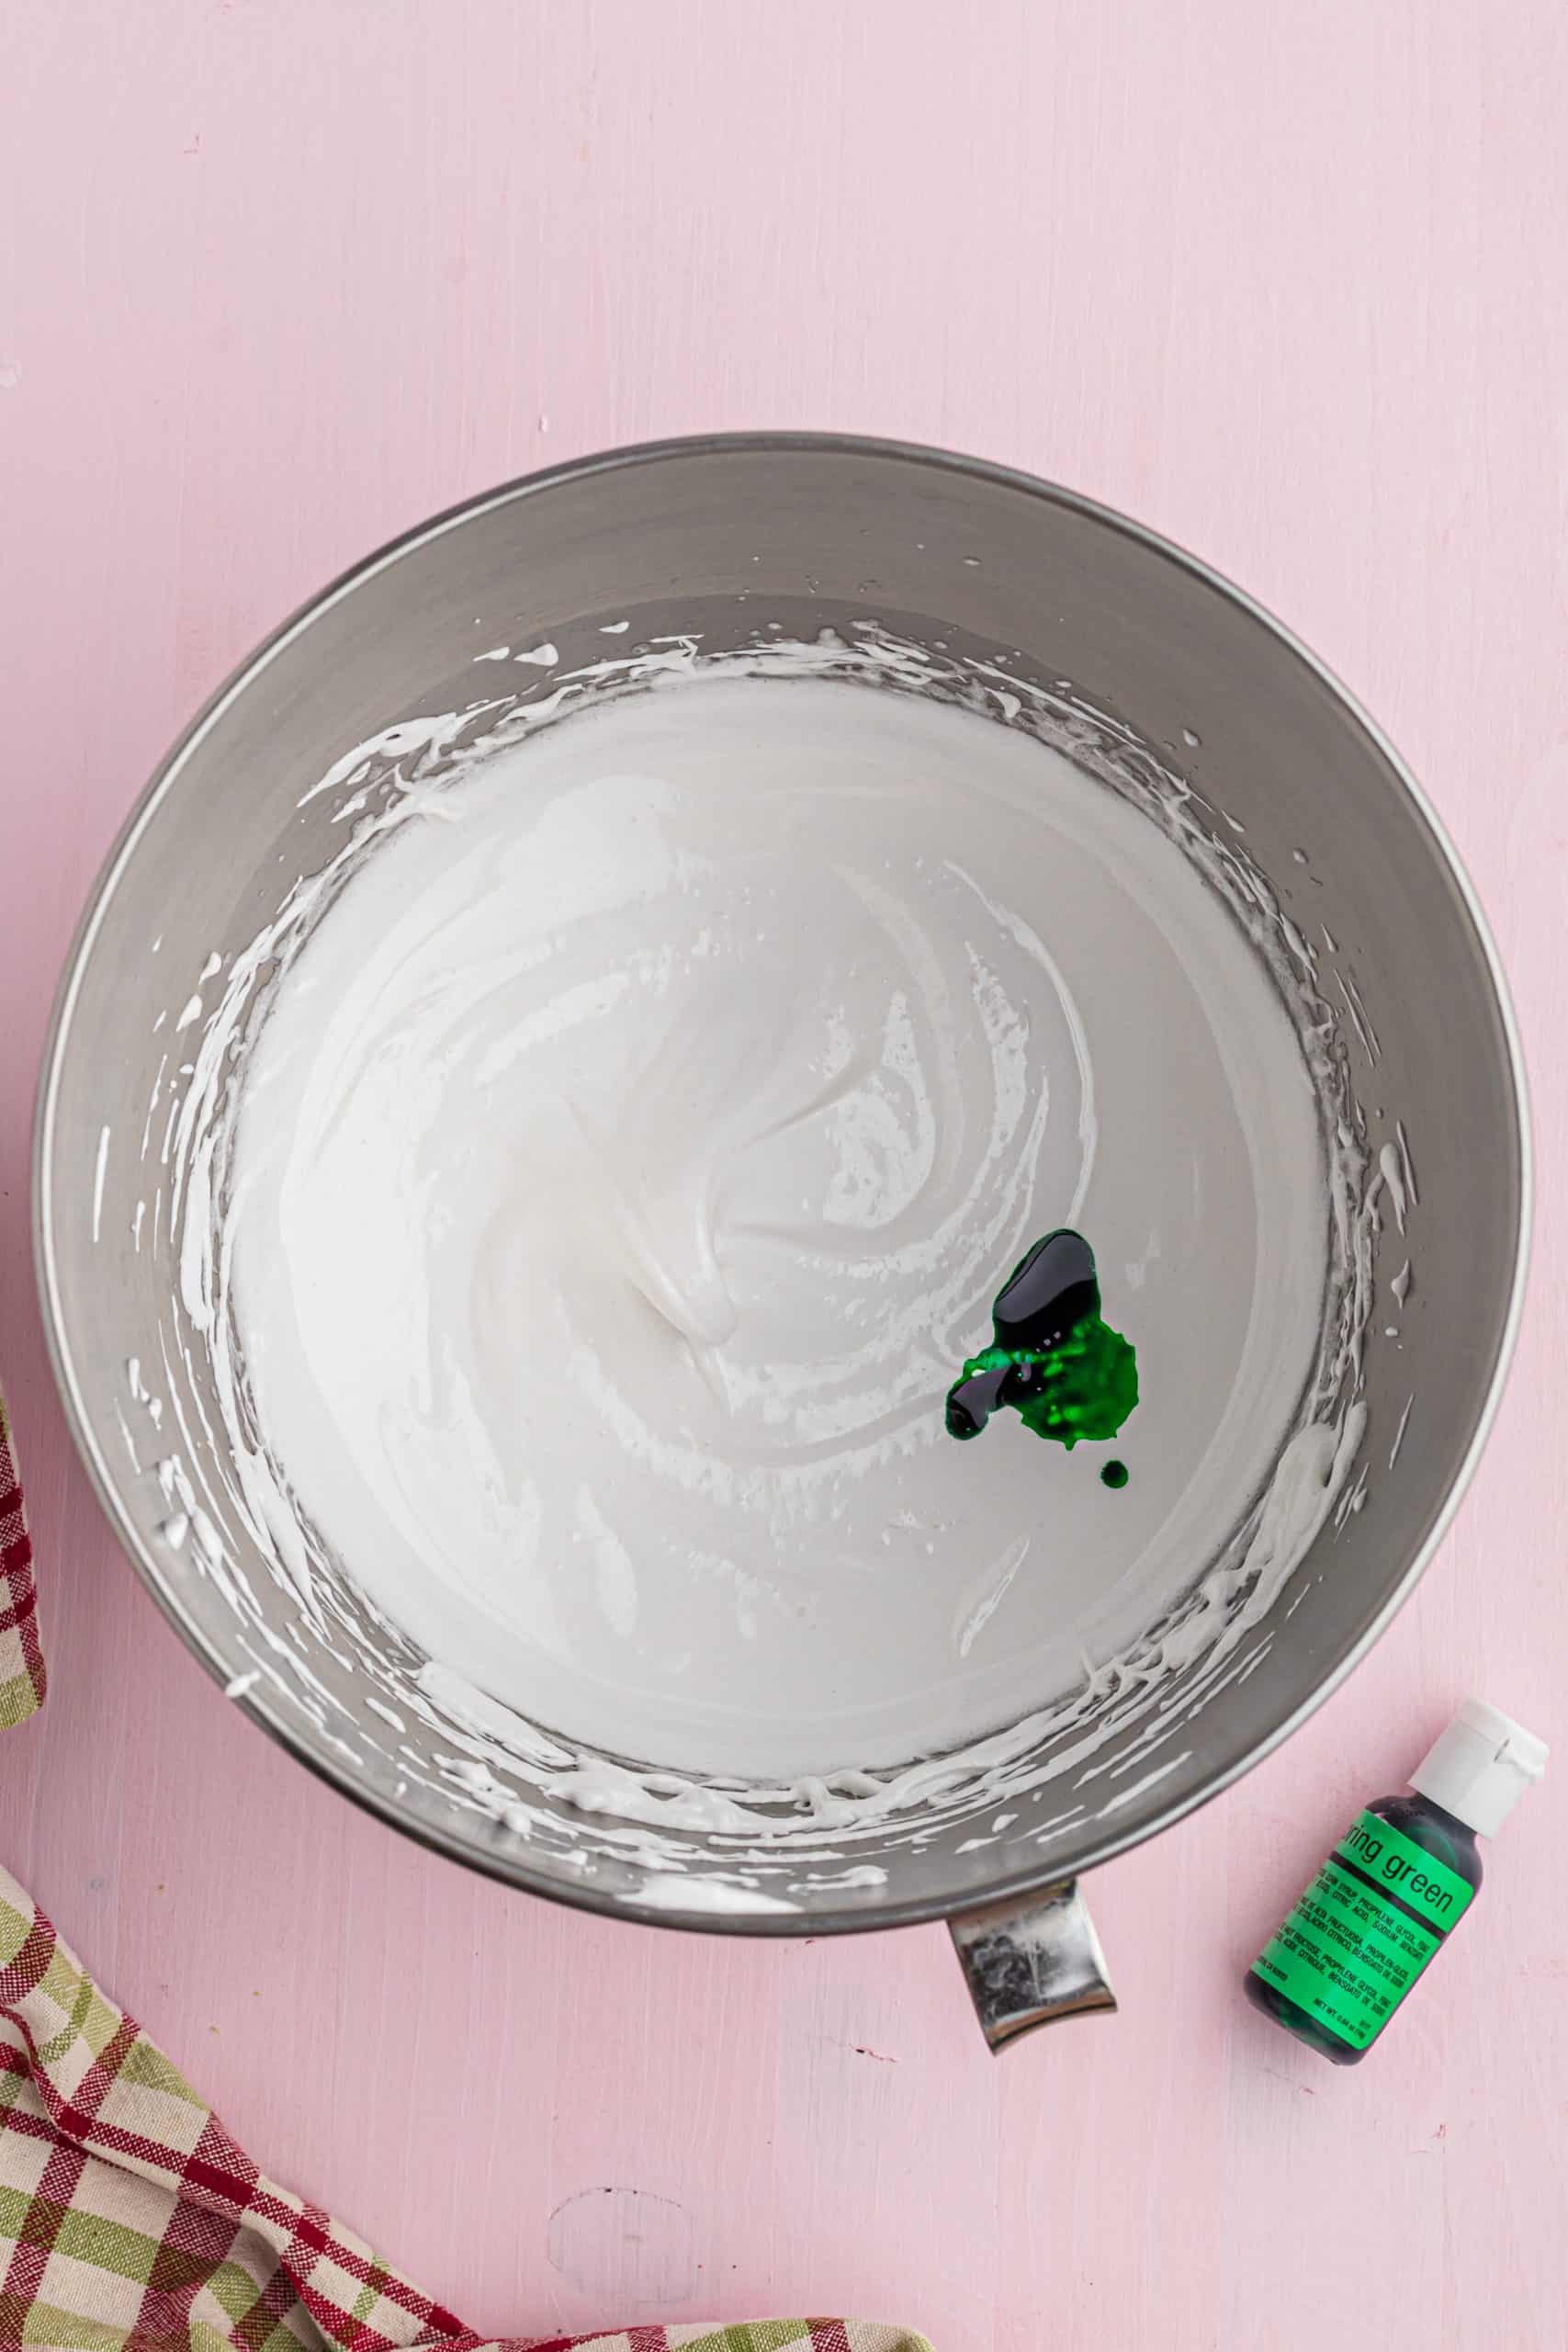 green food coloring in meringue batter in a mixing bowl.